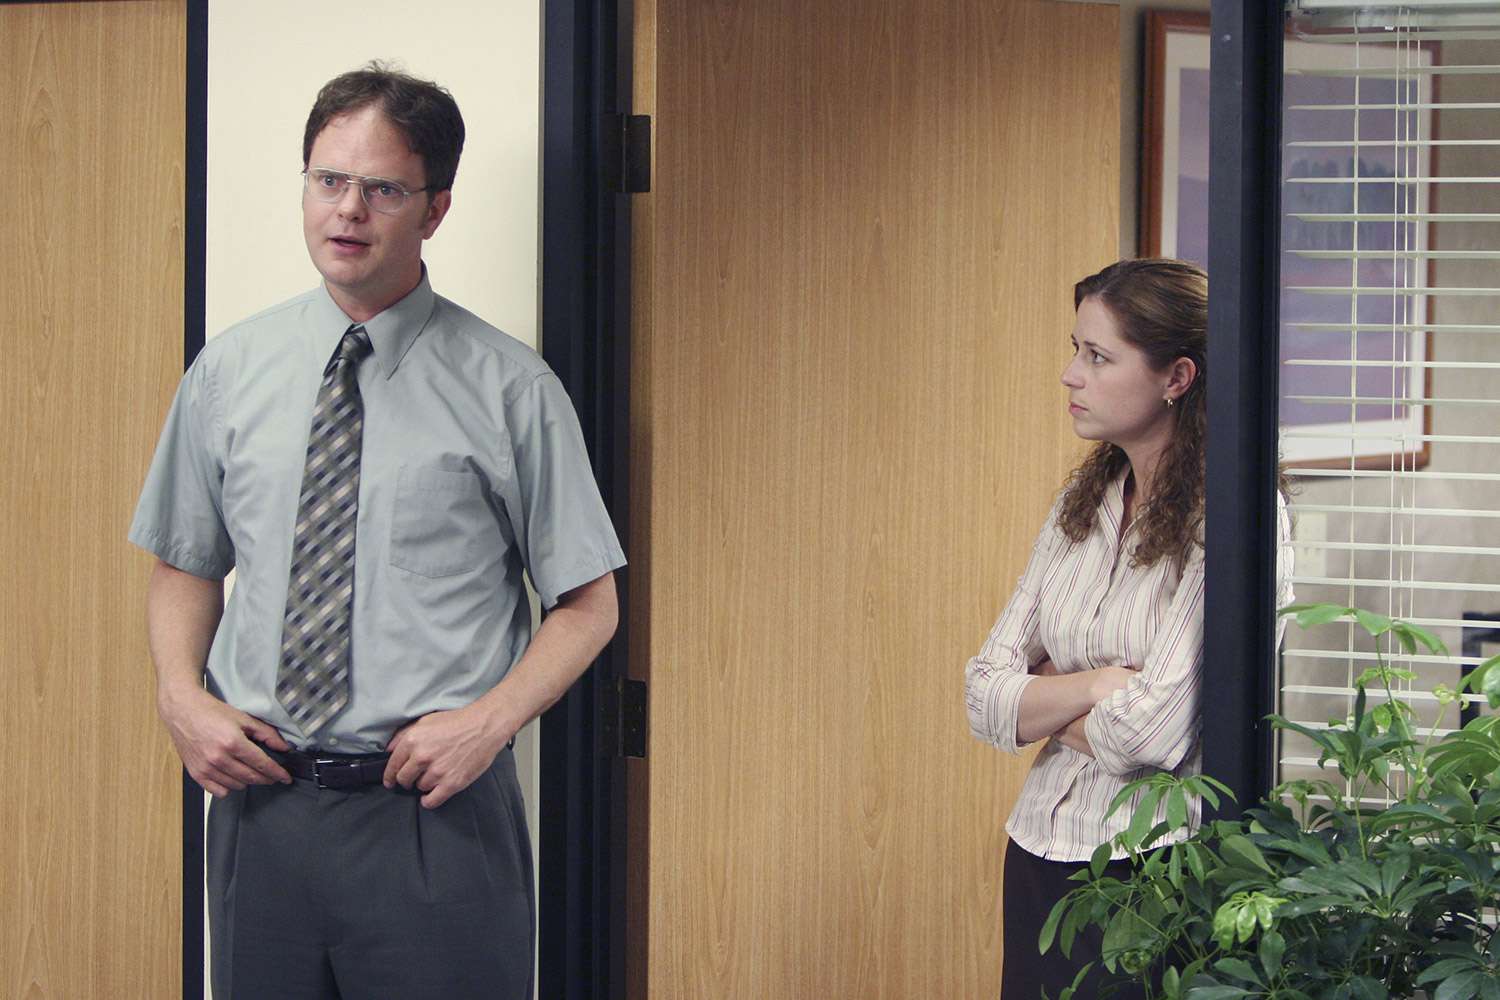 Pam and Dwight the office